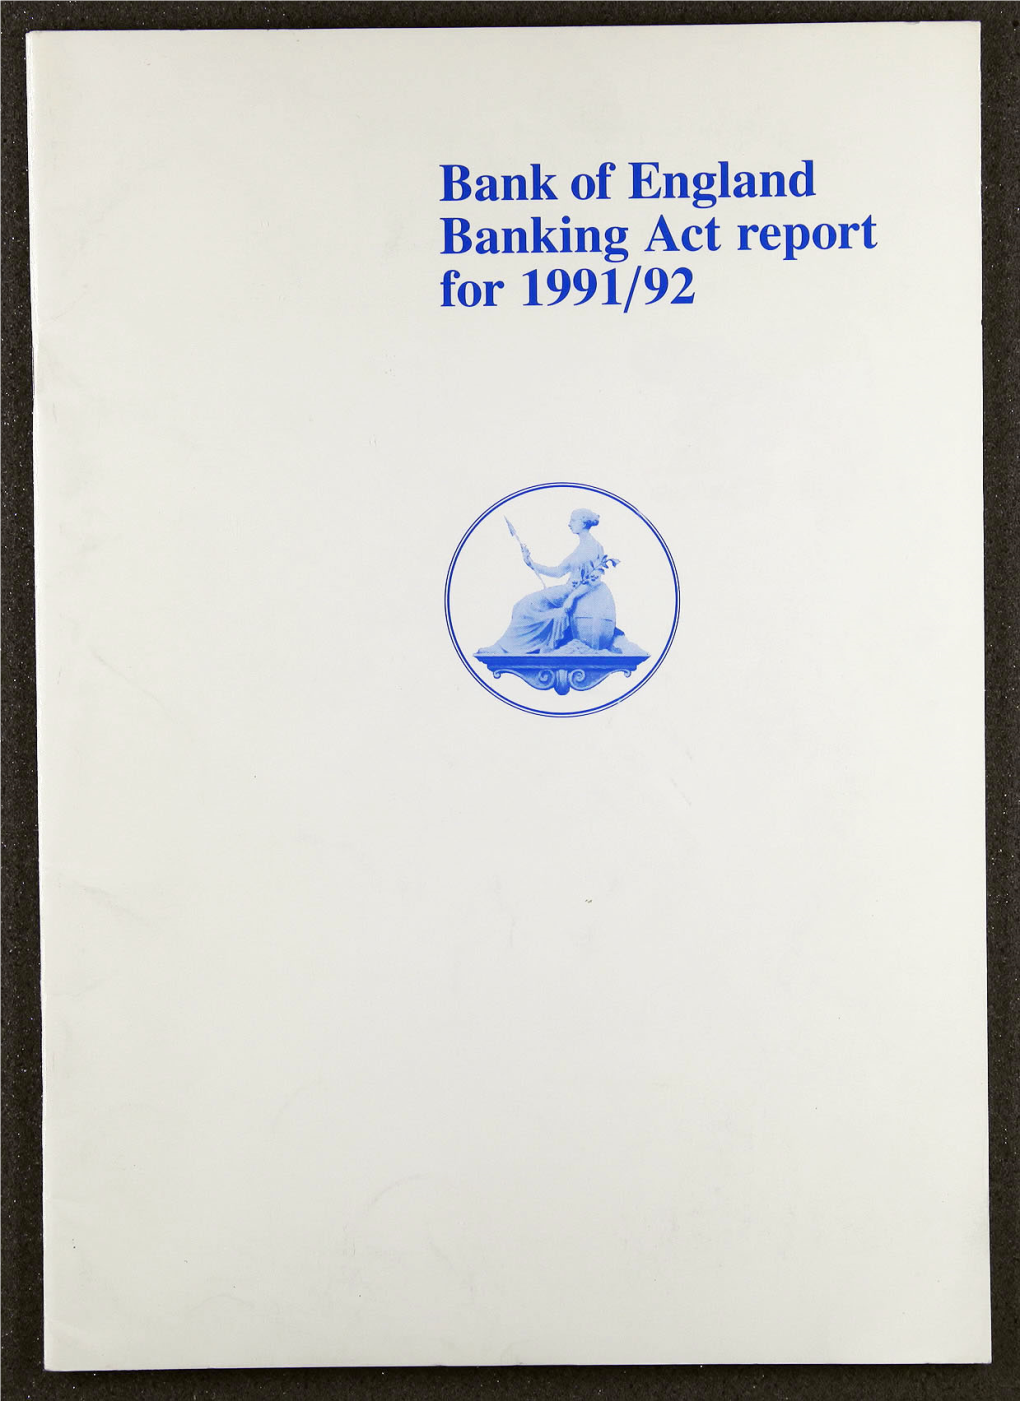 Banking Act Report 1991-92